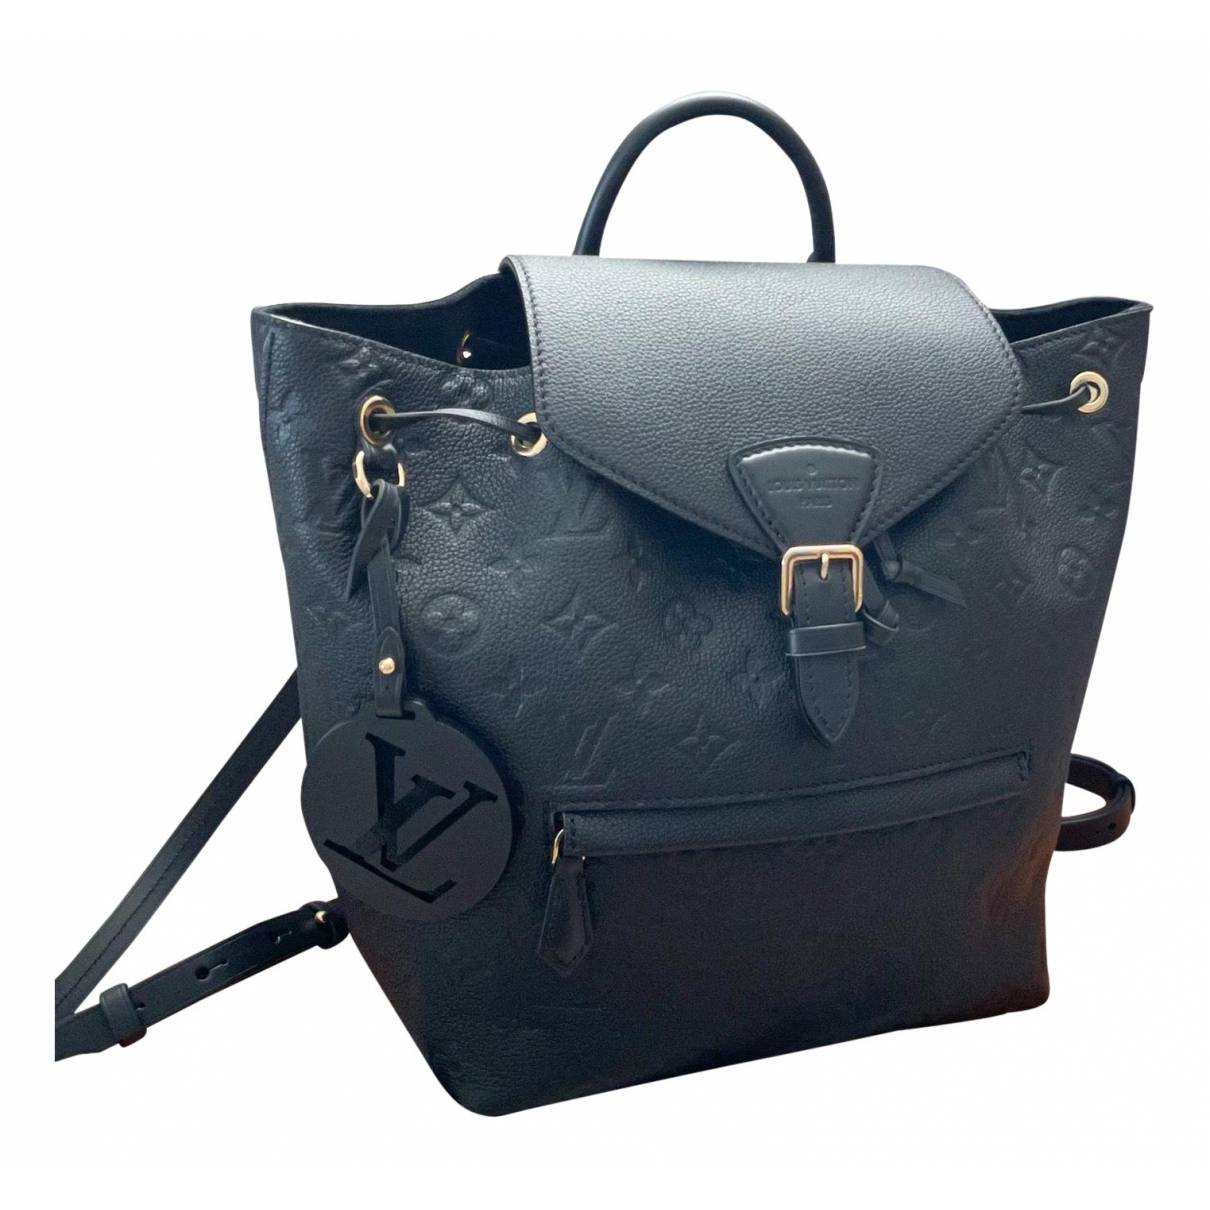 Louis Vuitton, Bags, Sold On Tradesy Louis Vuitton Palk Backpack